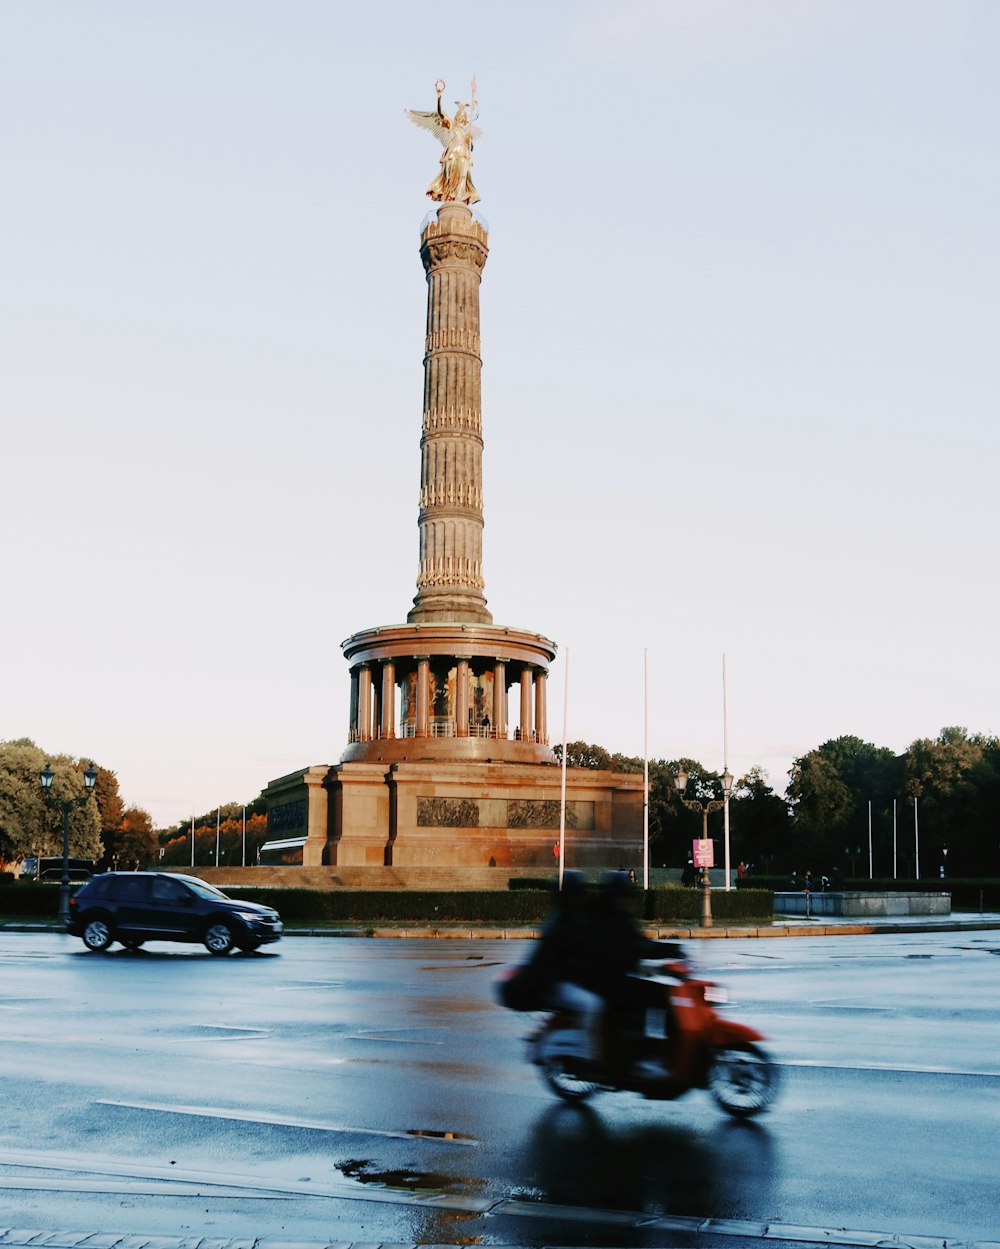 a person riding a motorcycle in front of a tall tower with Berlin Victory Column in the background